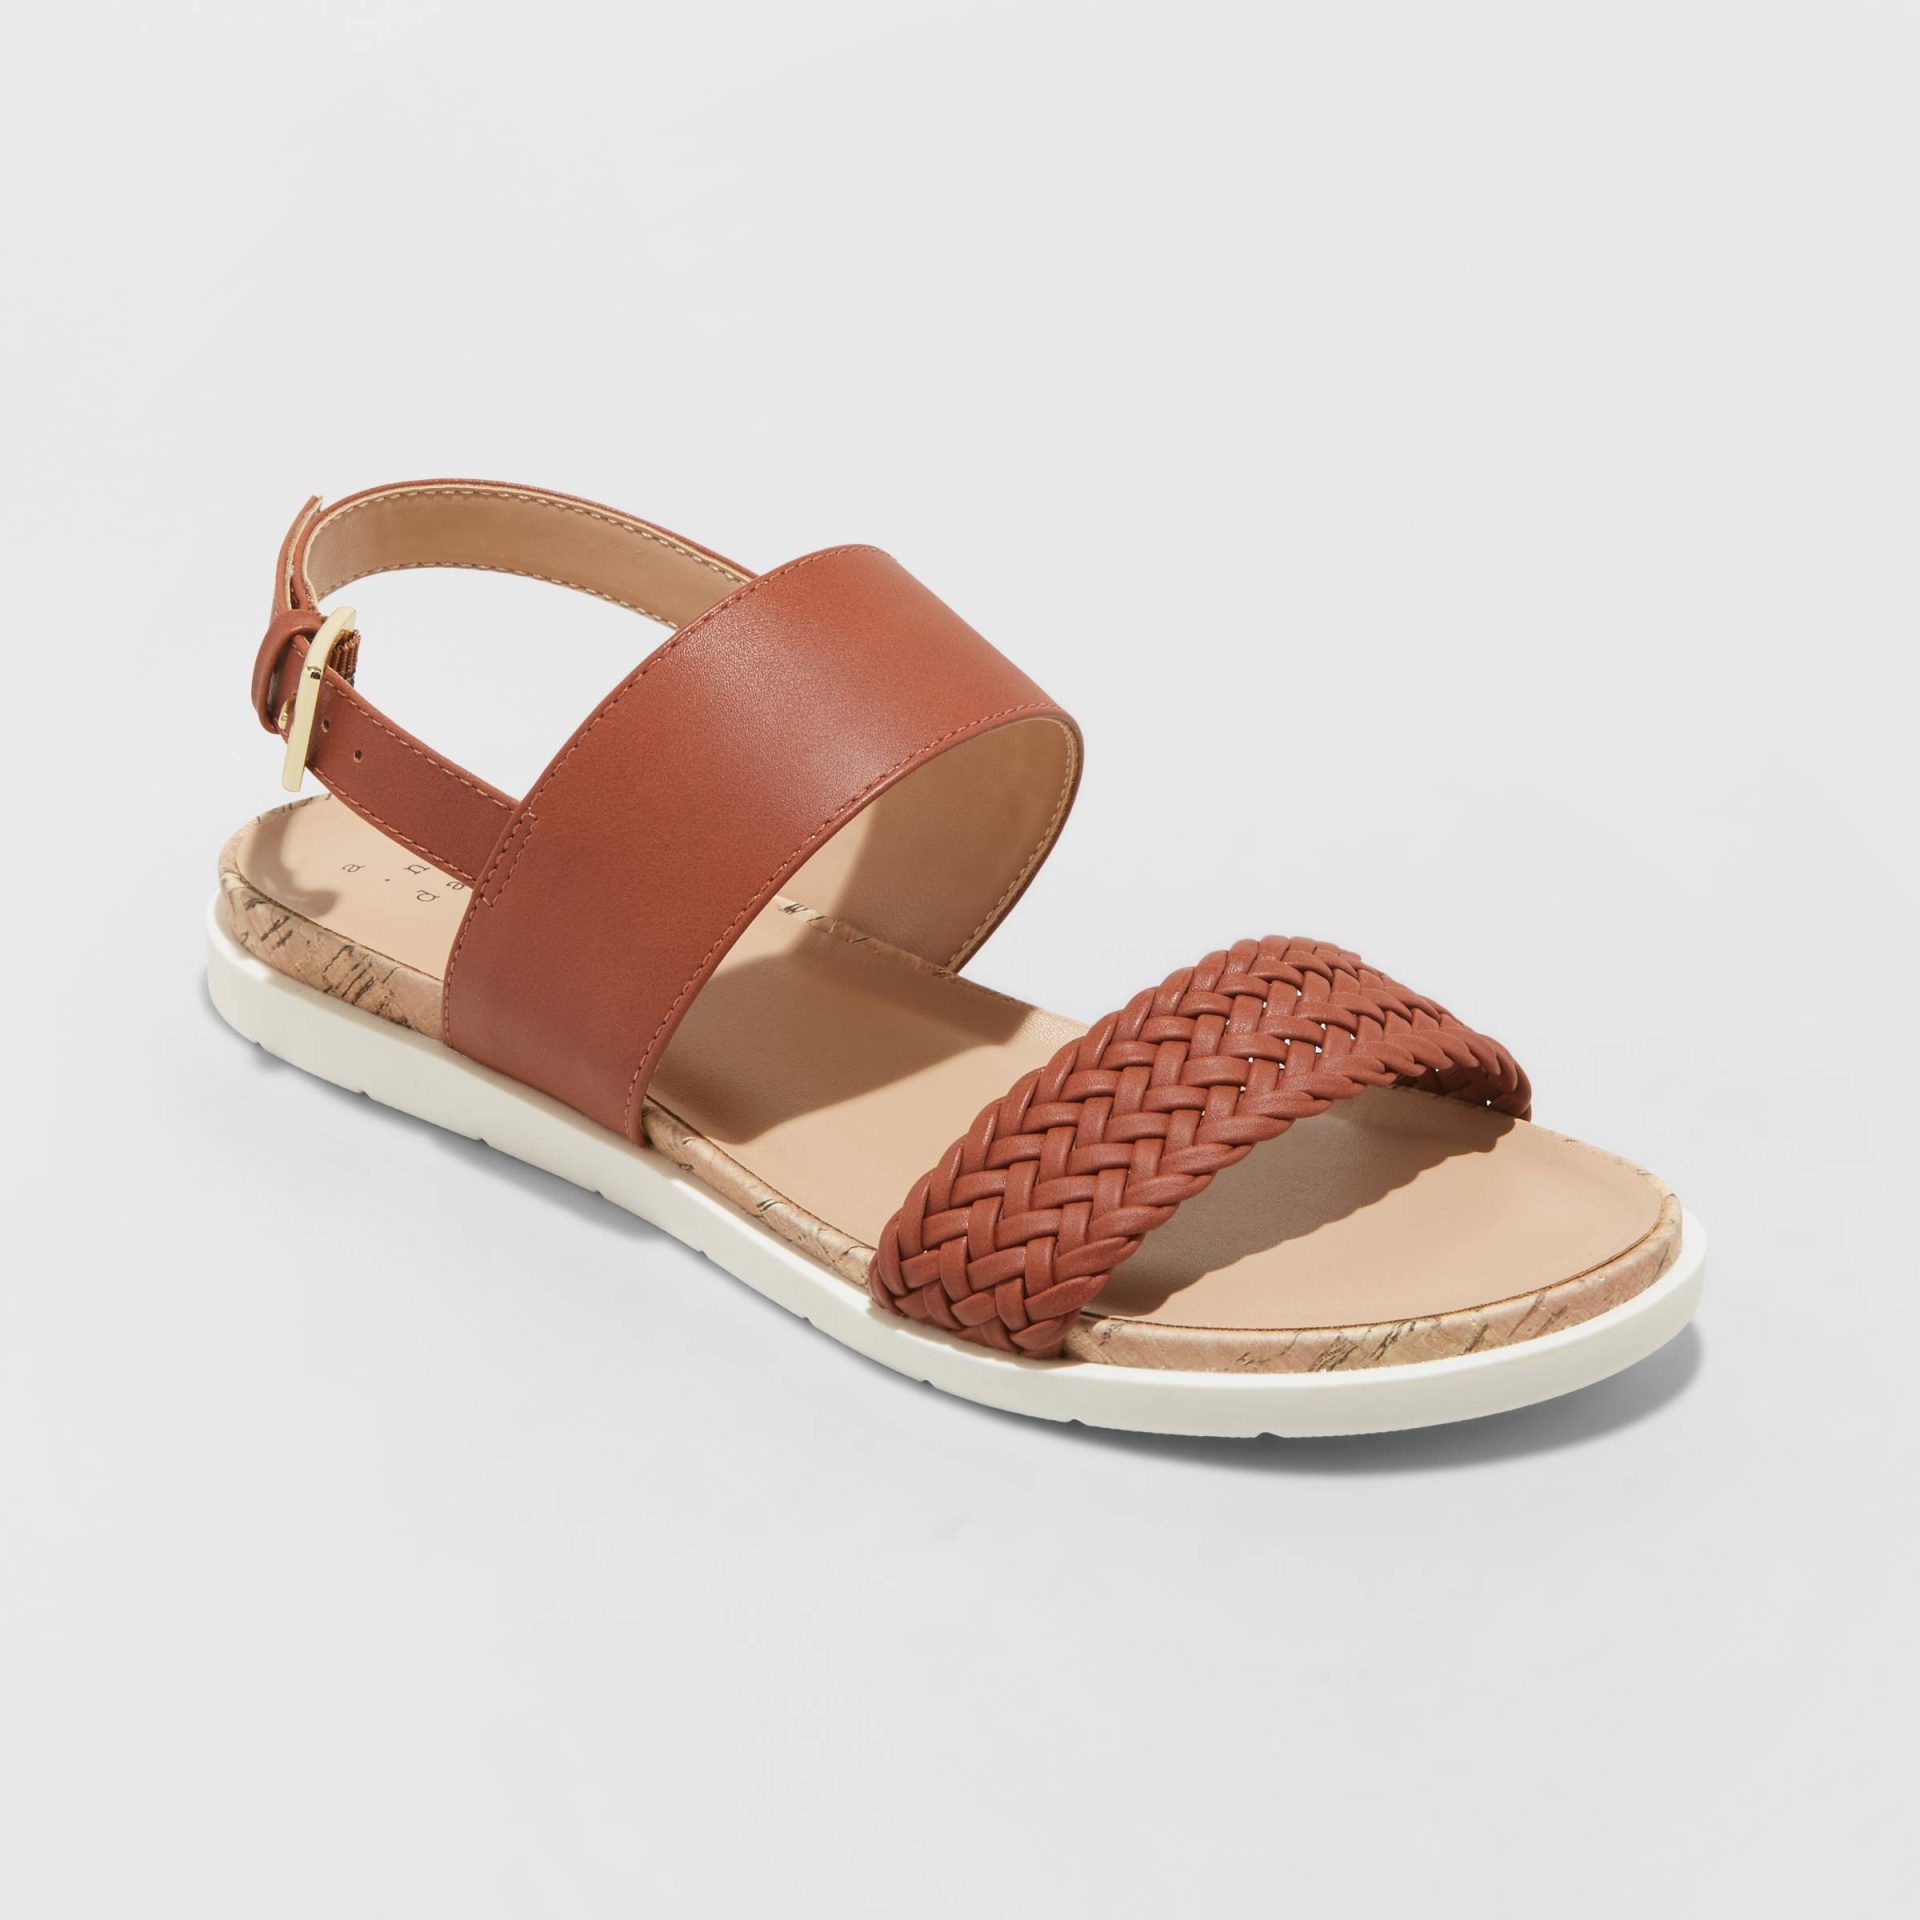 slide 1 of 4, Women's Malia Two Strap Ankle Sandals - A New Day Cognac 6, 1 ct